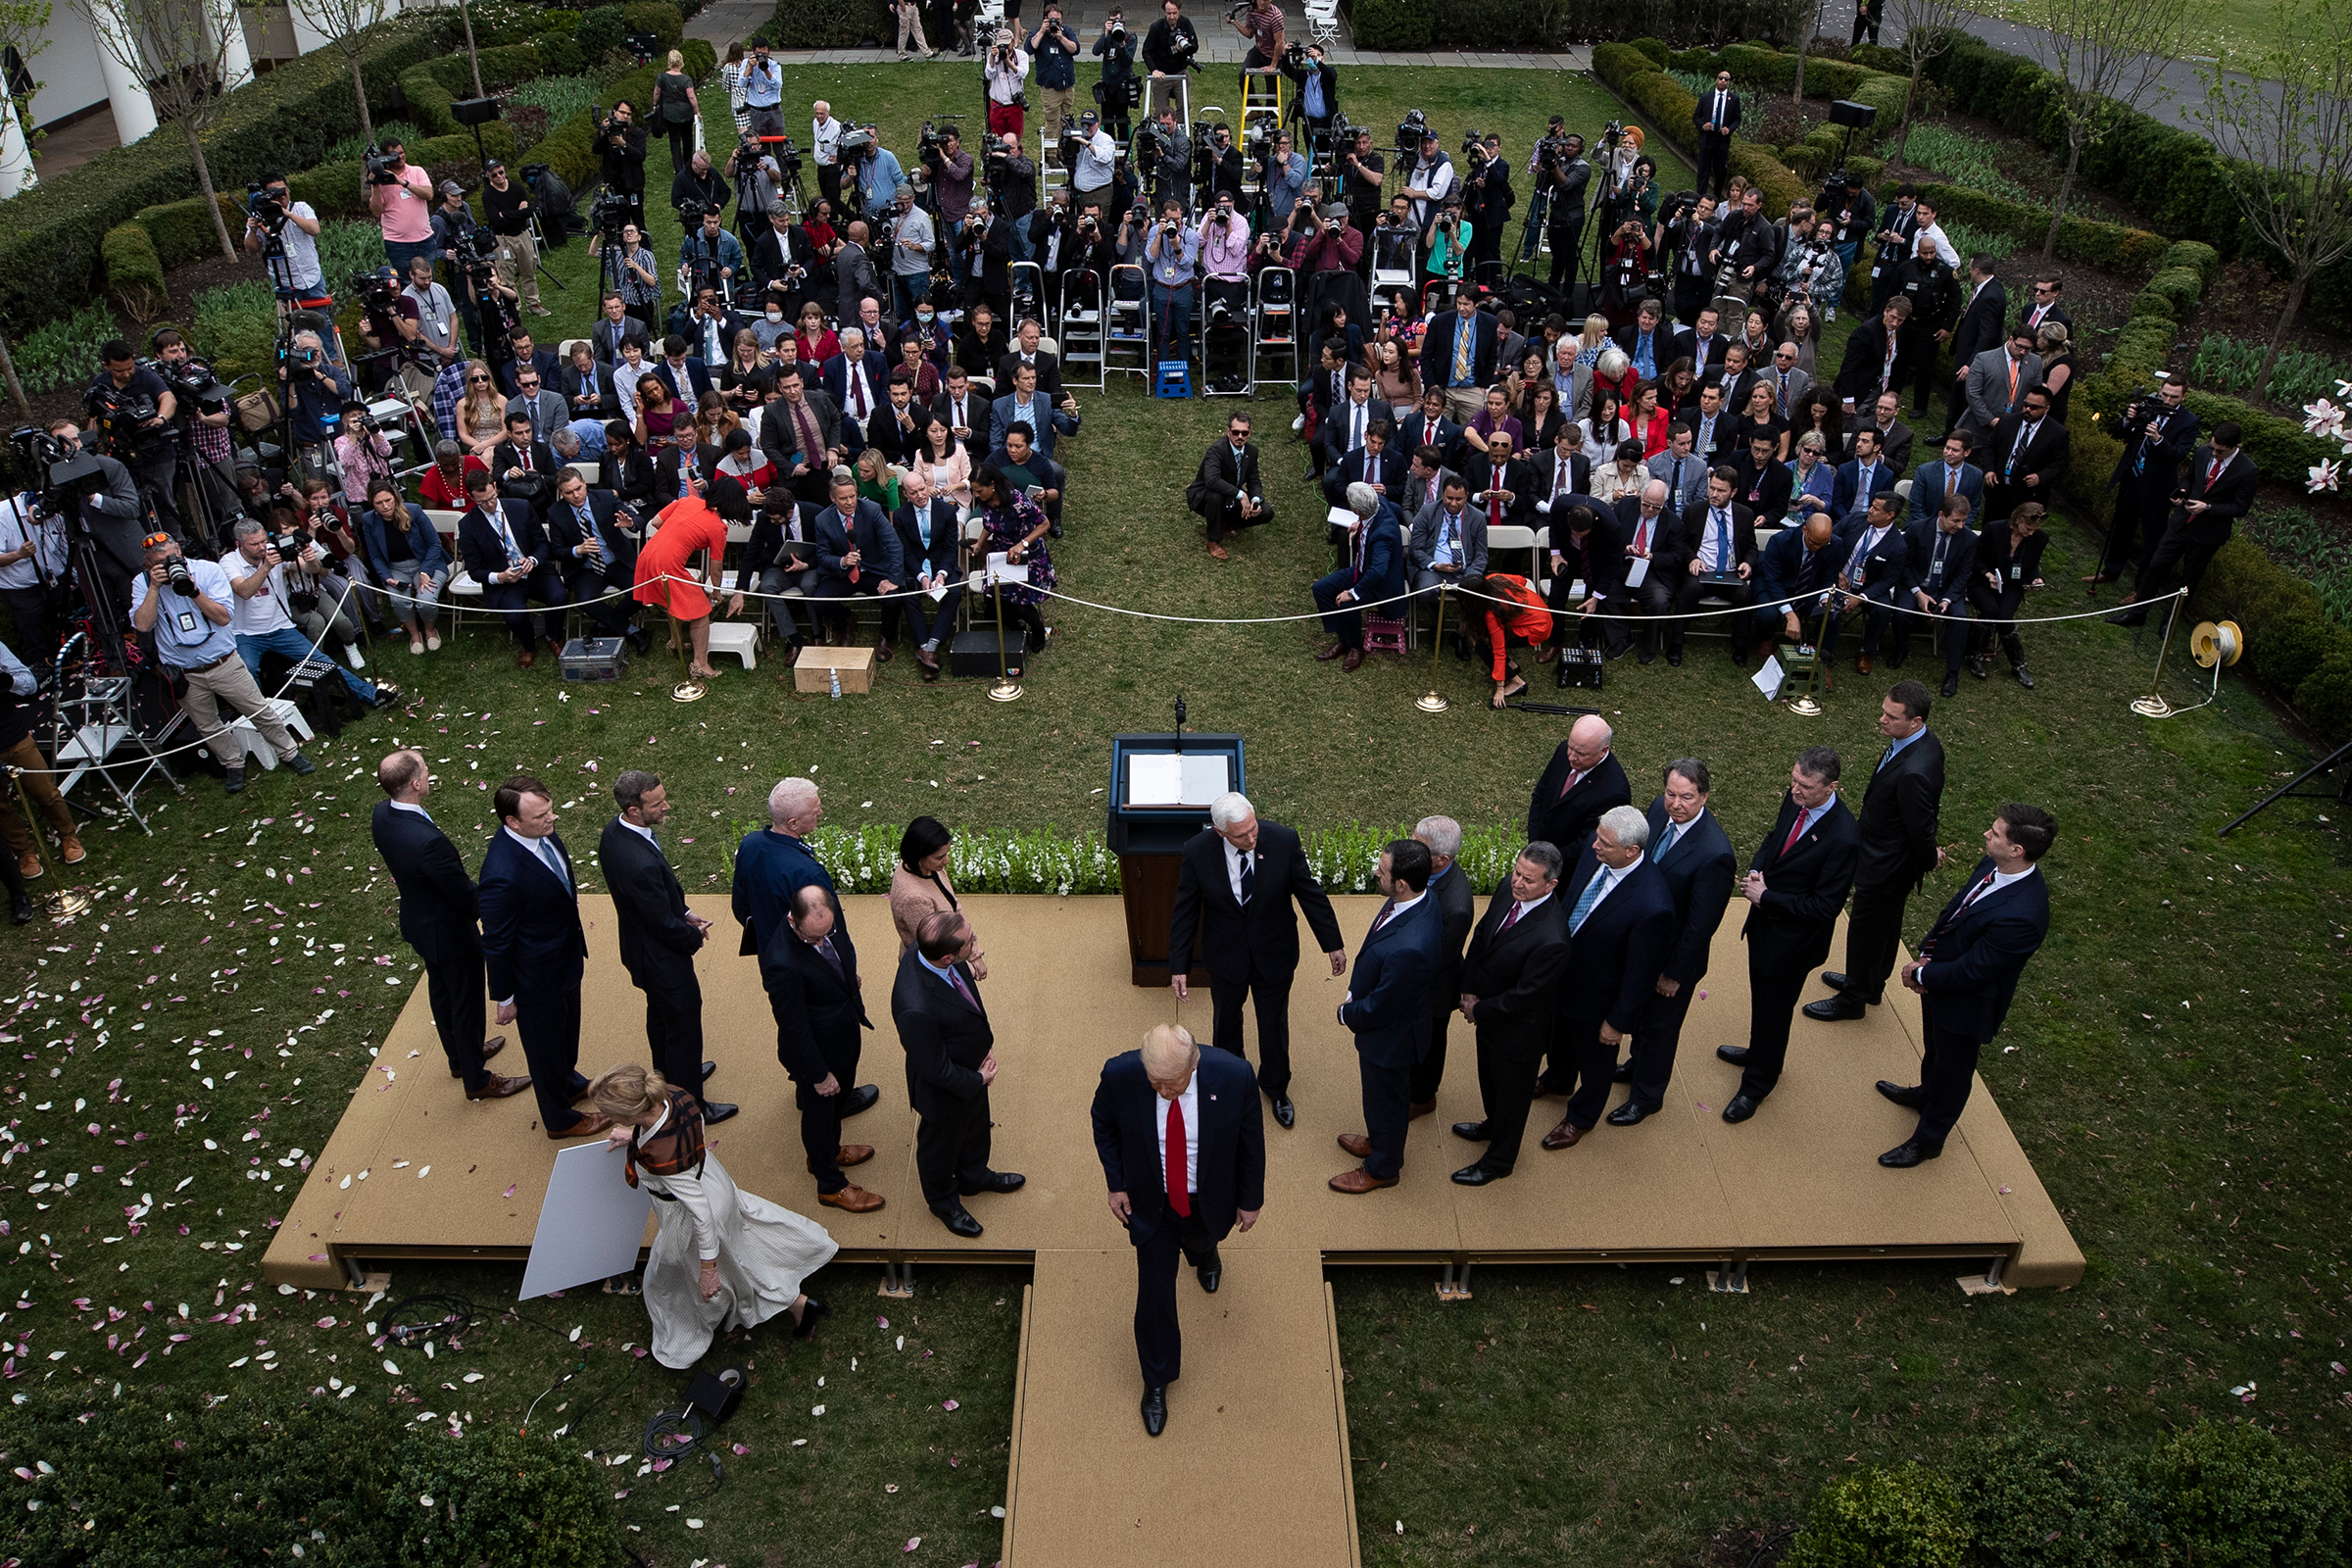 President Trump leaves the podium after announcing a national emergency during a news conference about the coronavirus at the White House in Washington, D.C., on March 13.